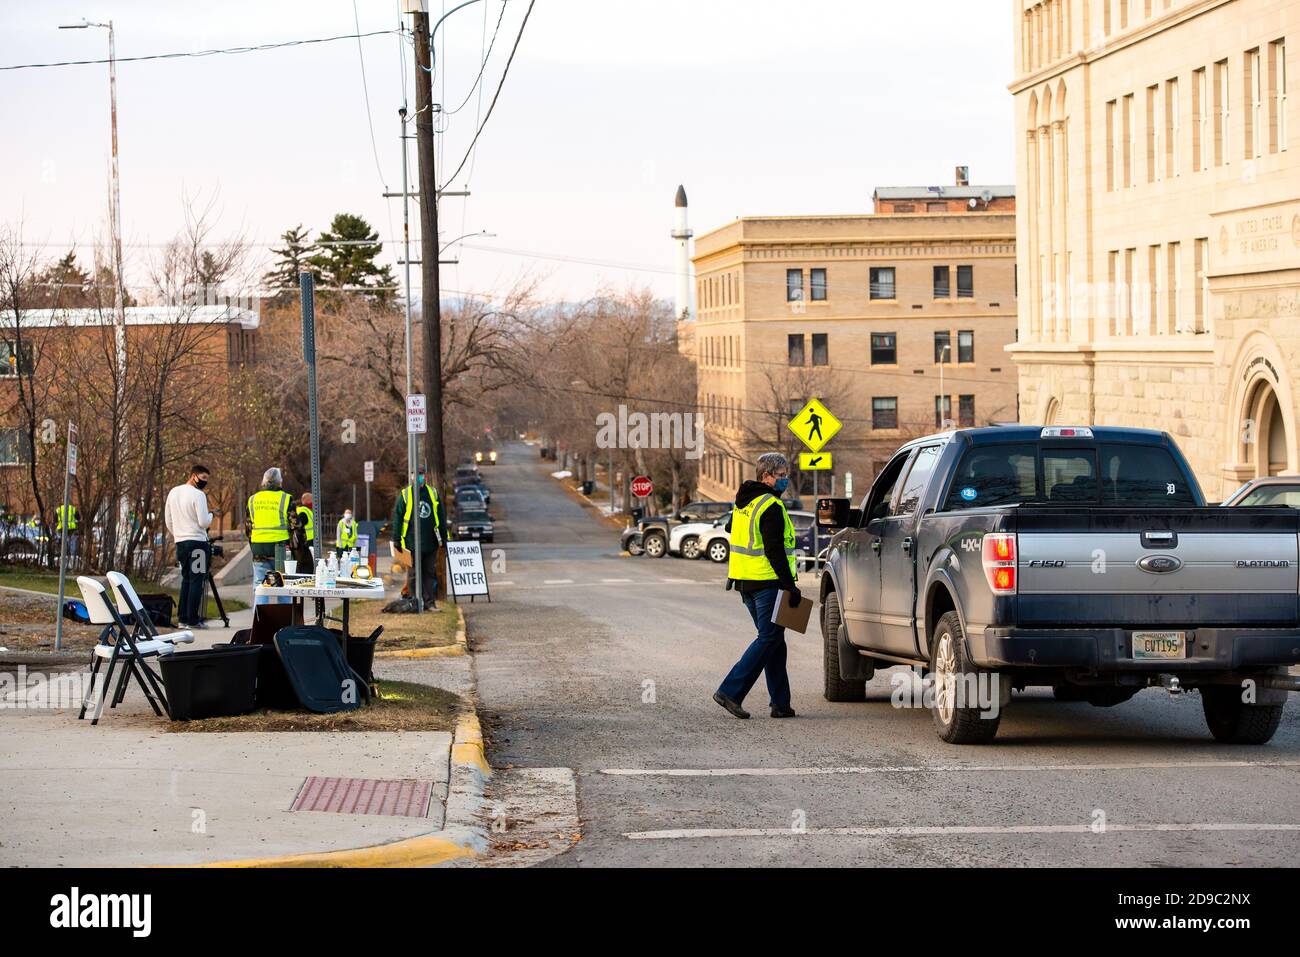 Helena, Montana / November 3, 2020: Election Day voting at polling station outside, woman poll worker in yellow vest wearing a mask for safety during Stock Photo